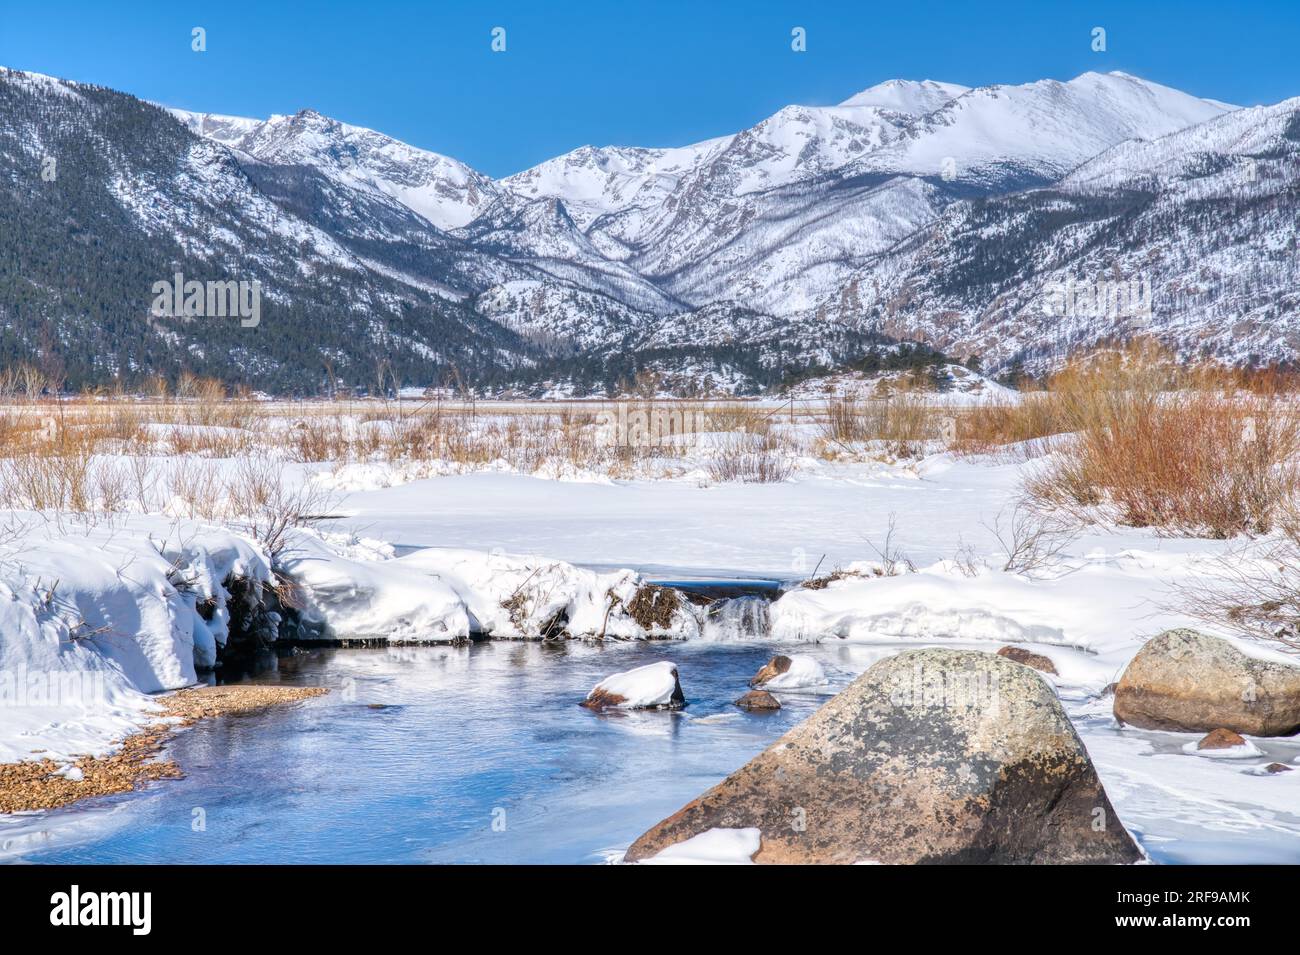 Winter snow along the Big Thompson River in Moraine Park in Rocky Mountain National Park, Colorado Stock Photo